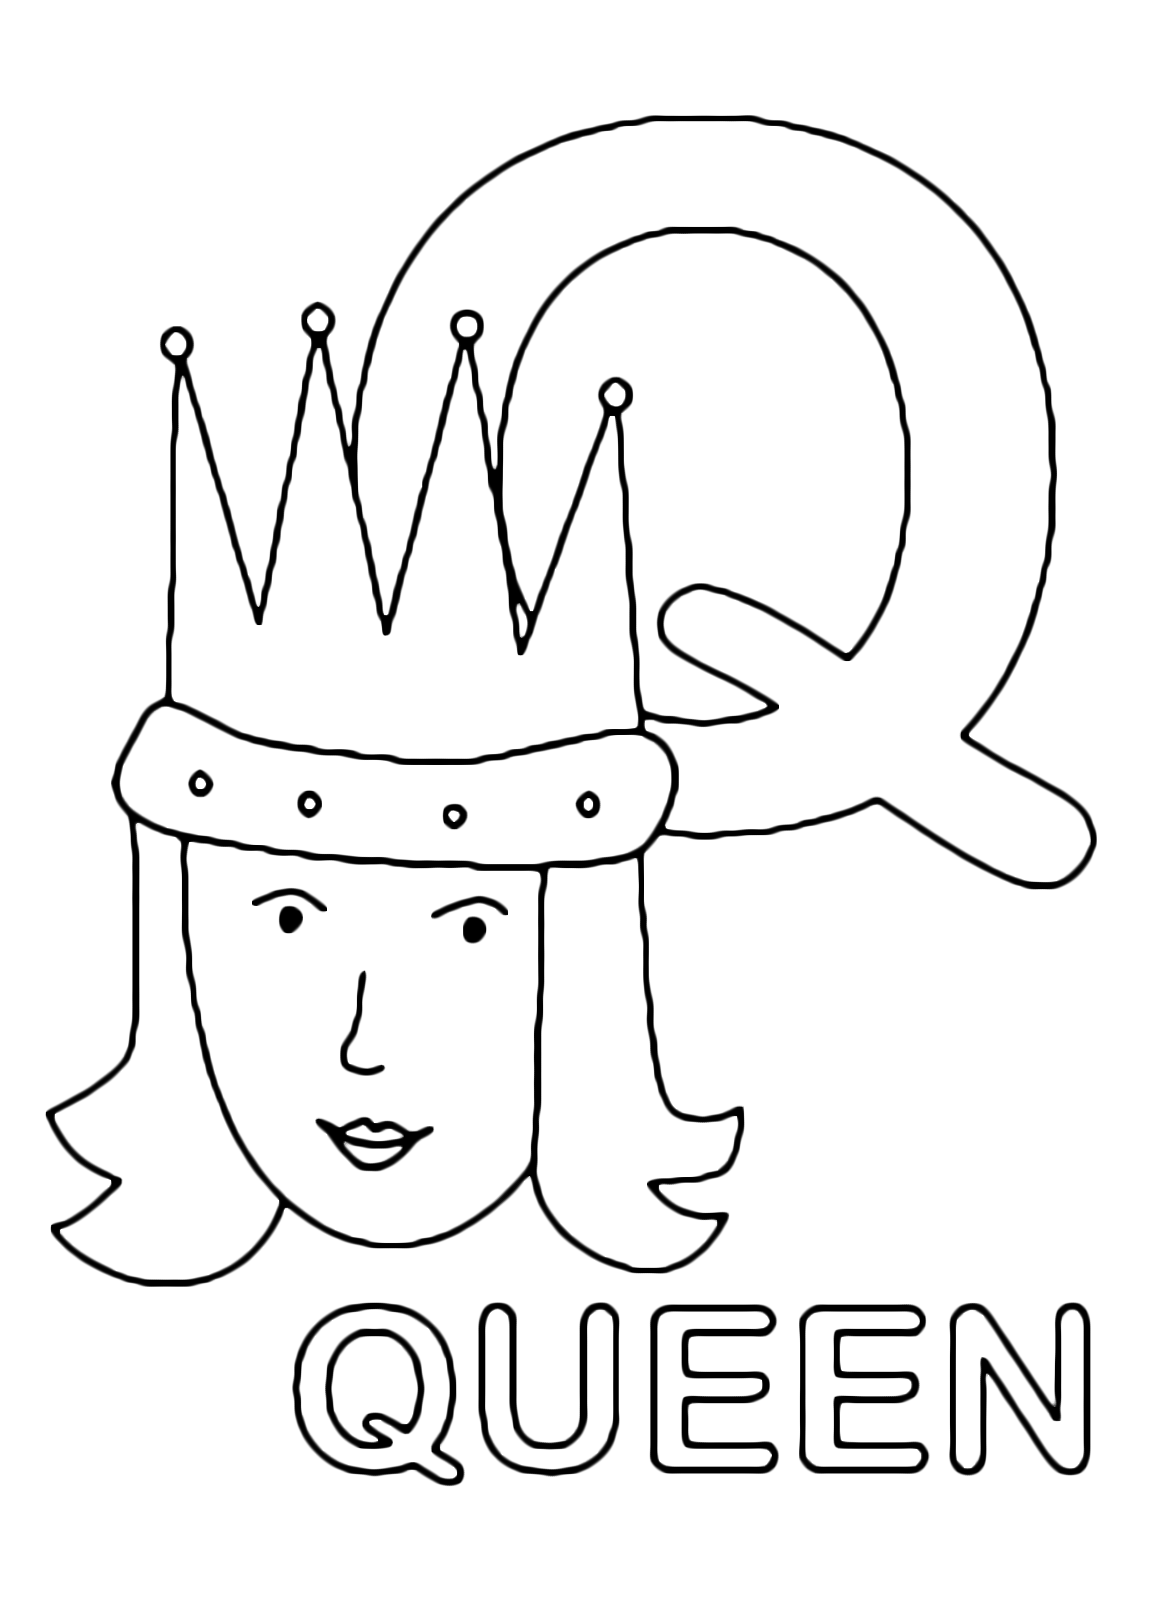 Letters and numbers - Q for queen uppercase letter